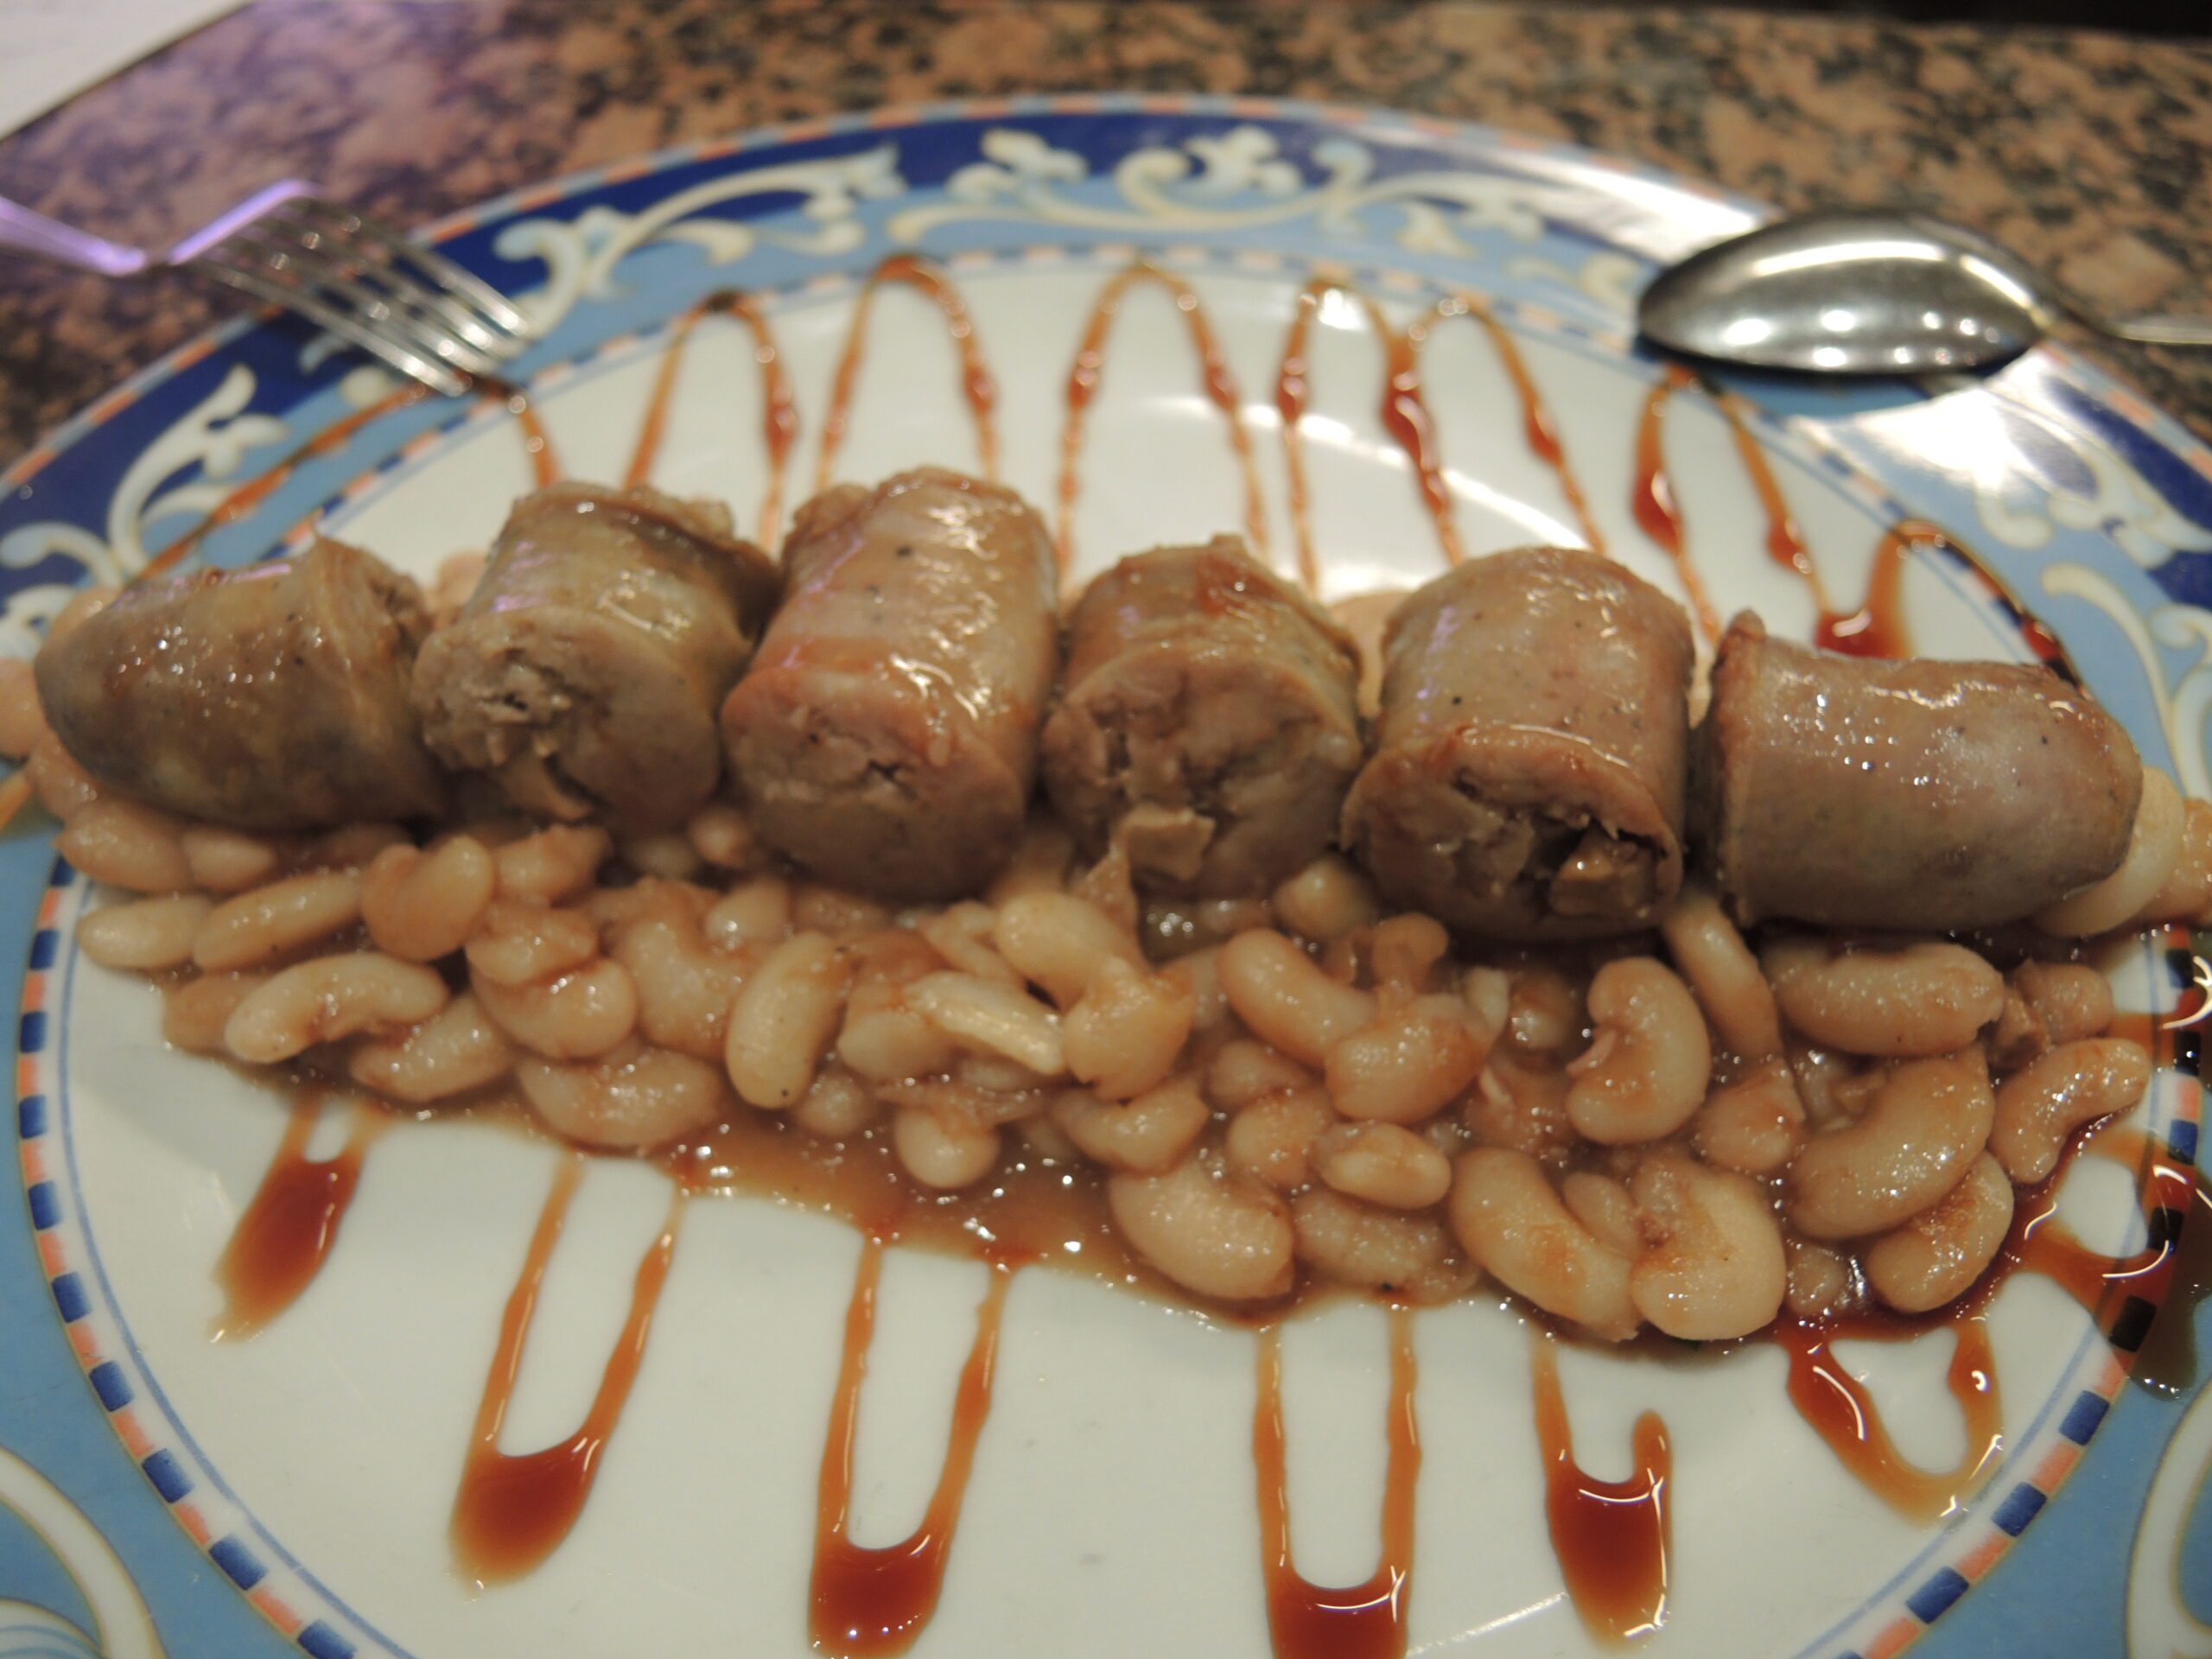 a plate of food with beans and meat